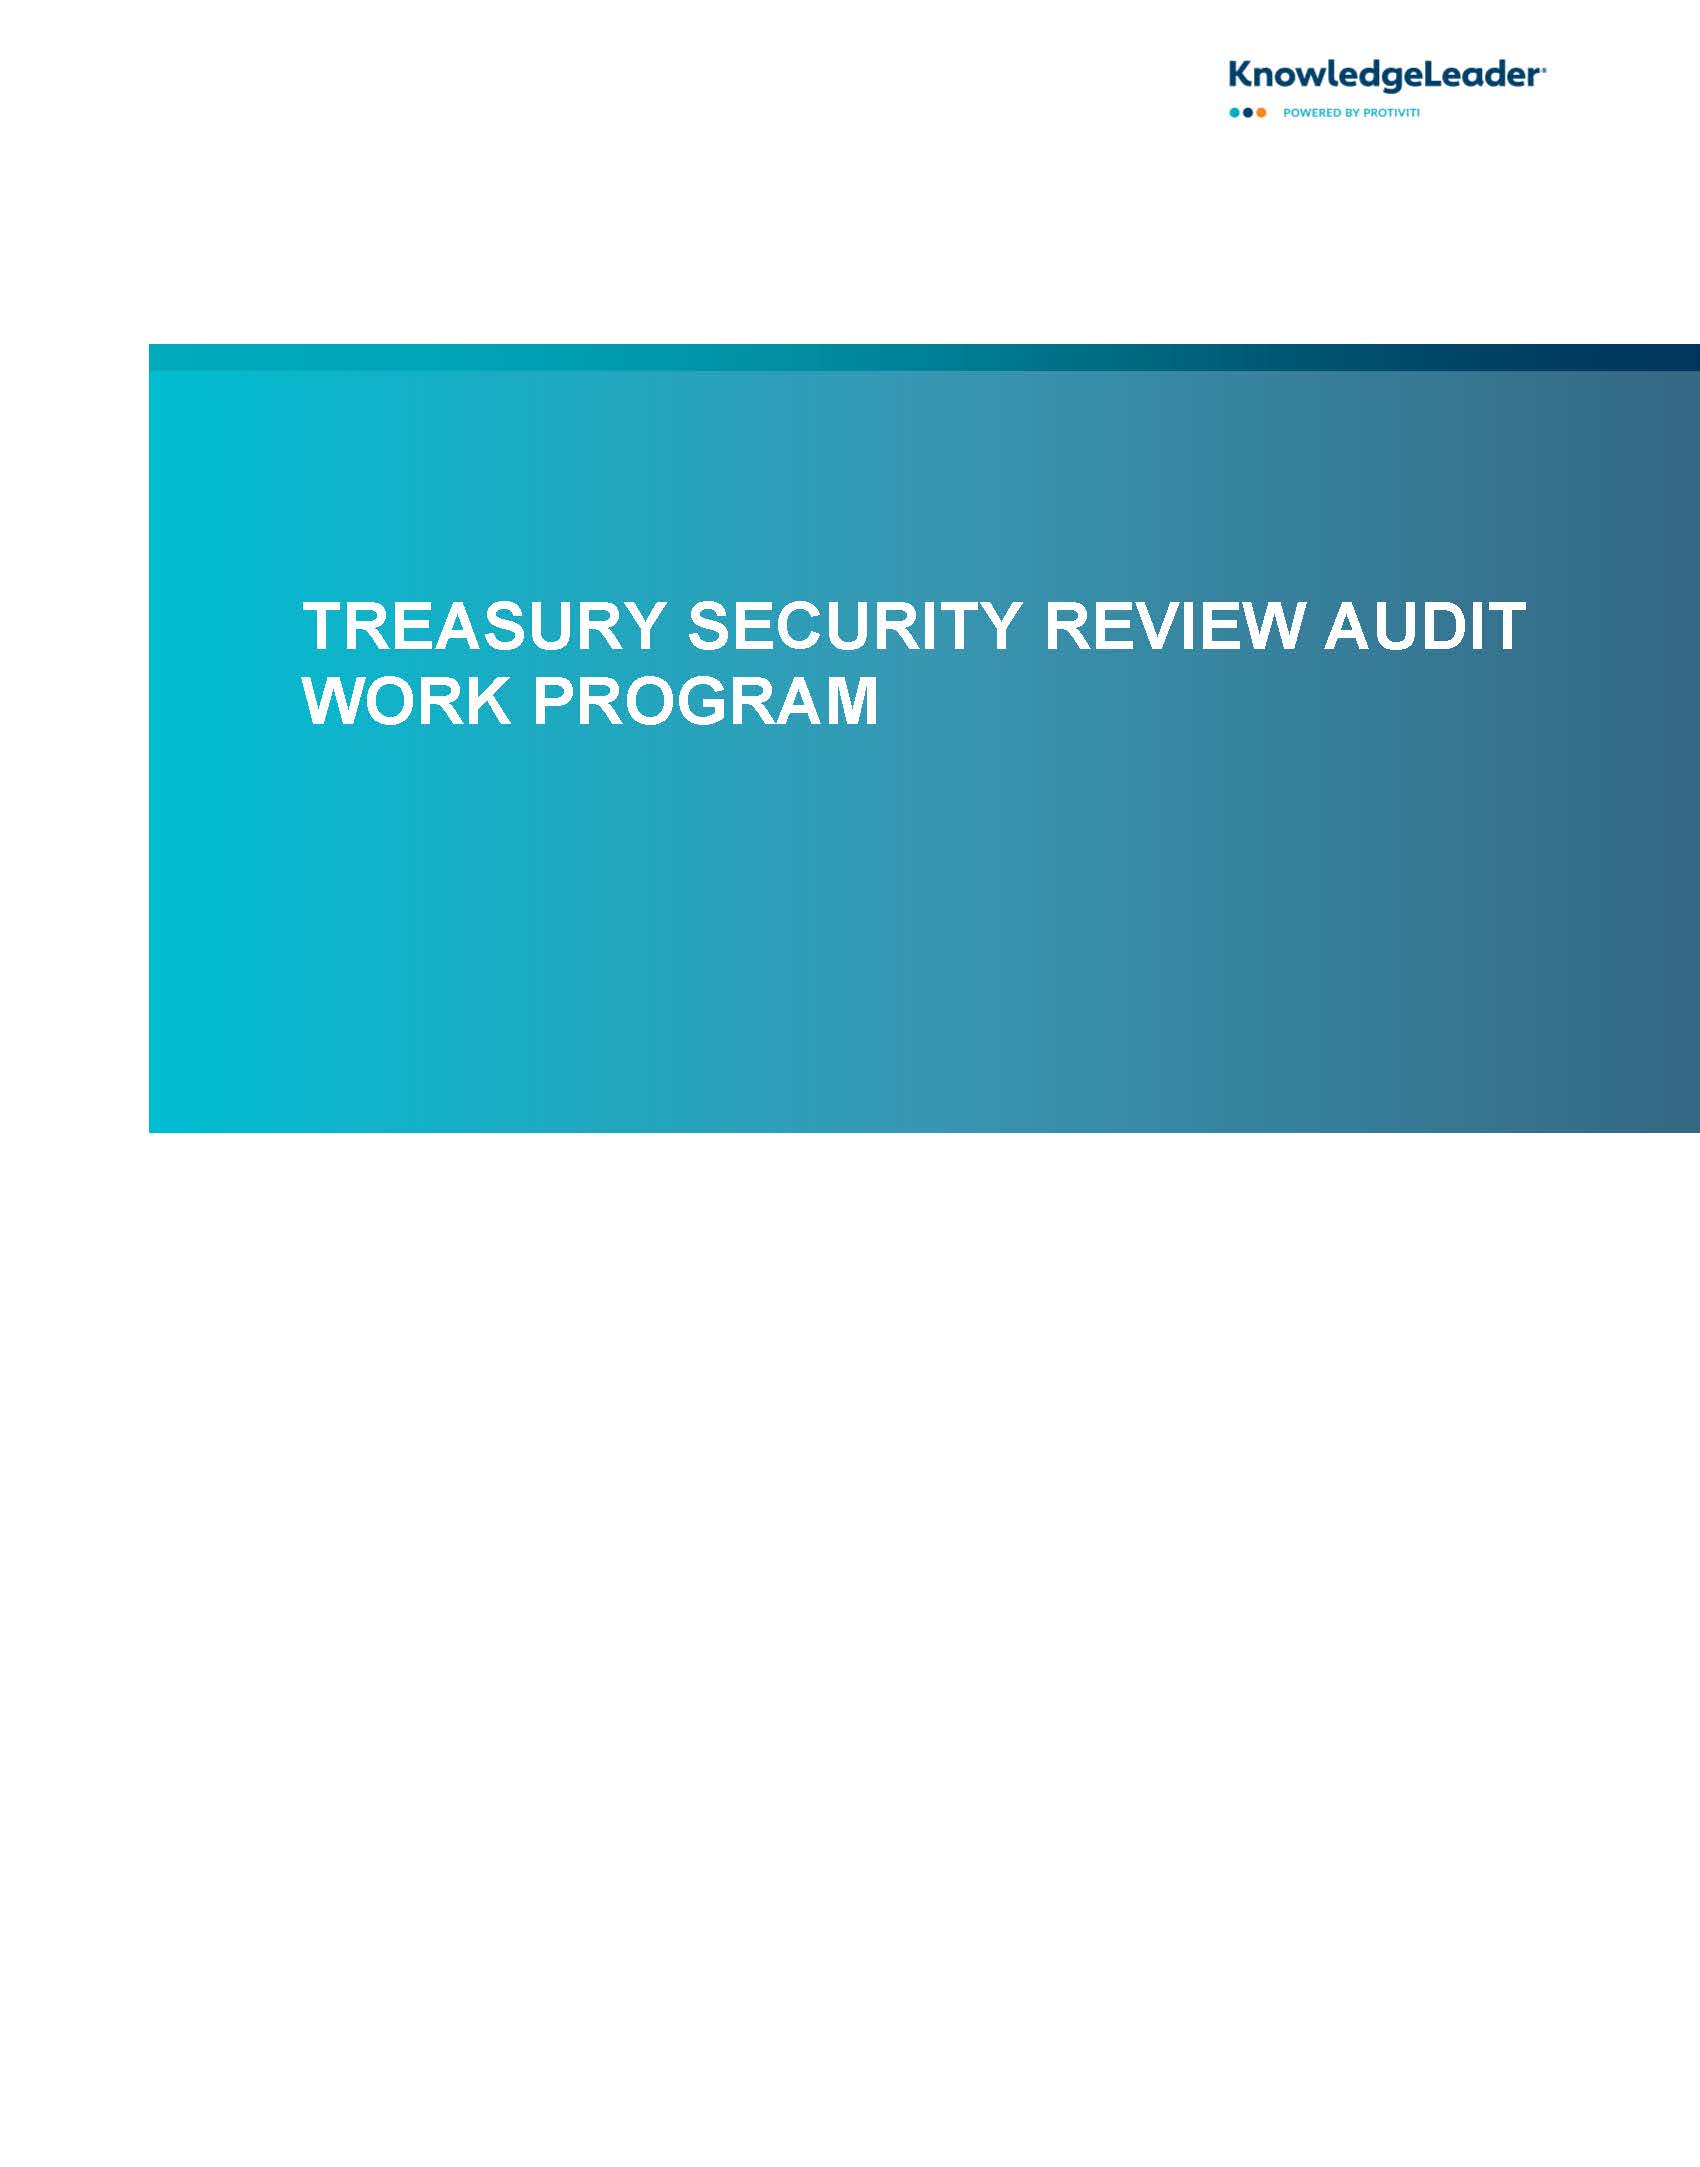 Screenshot of the first page of Treasury Security Review Audit Work Program